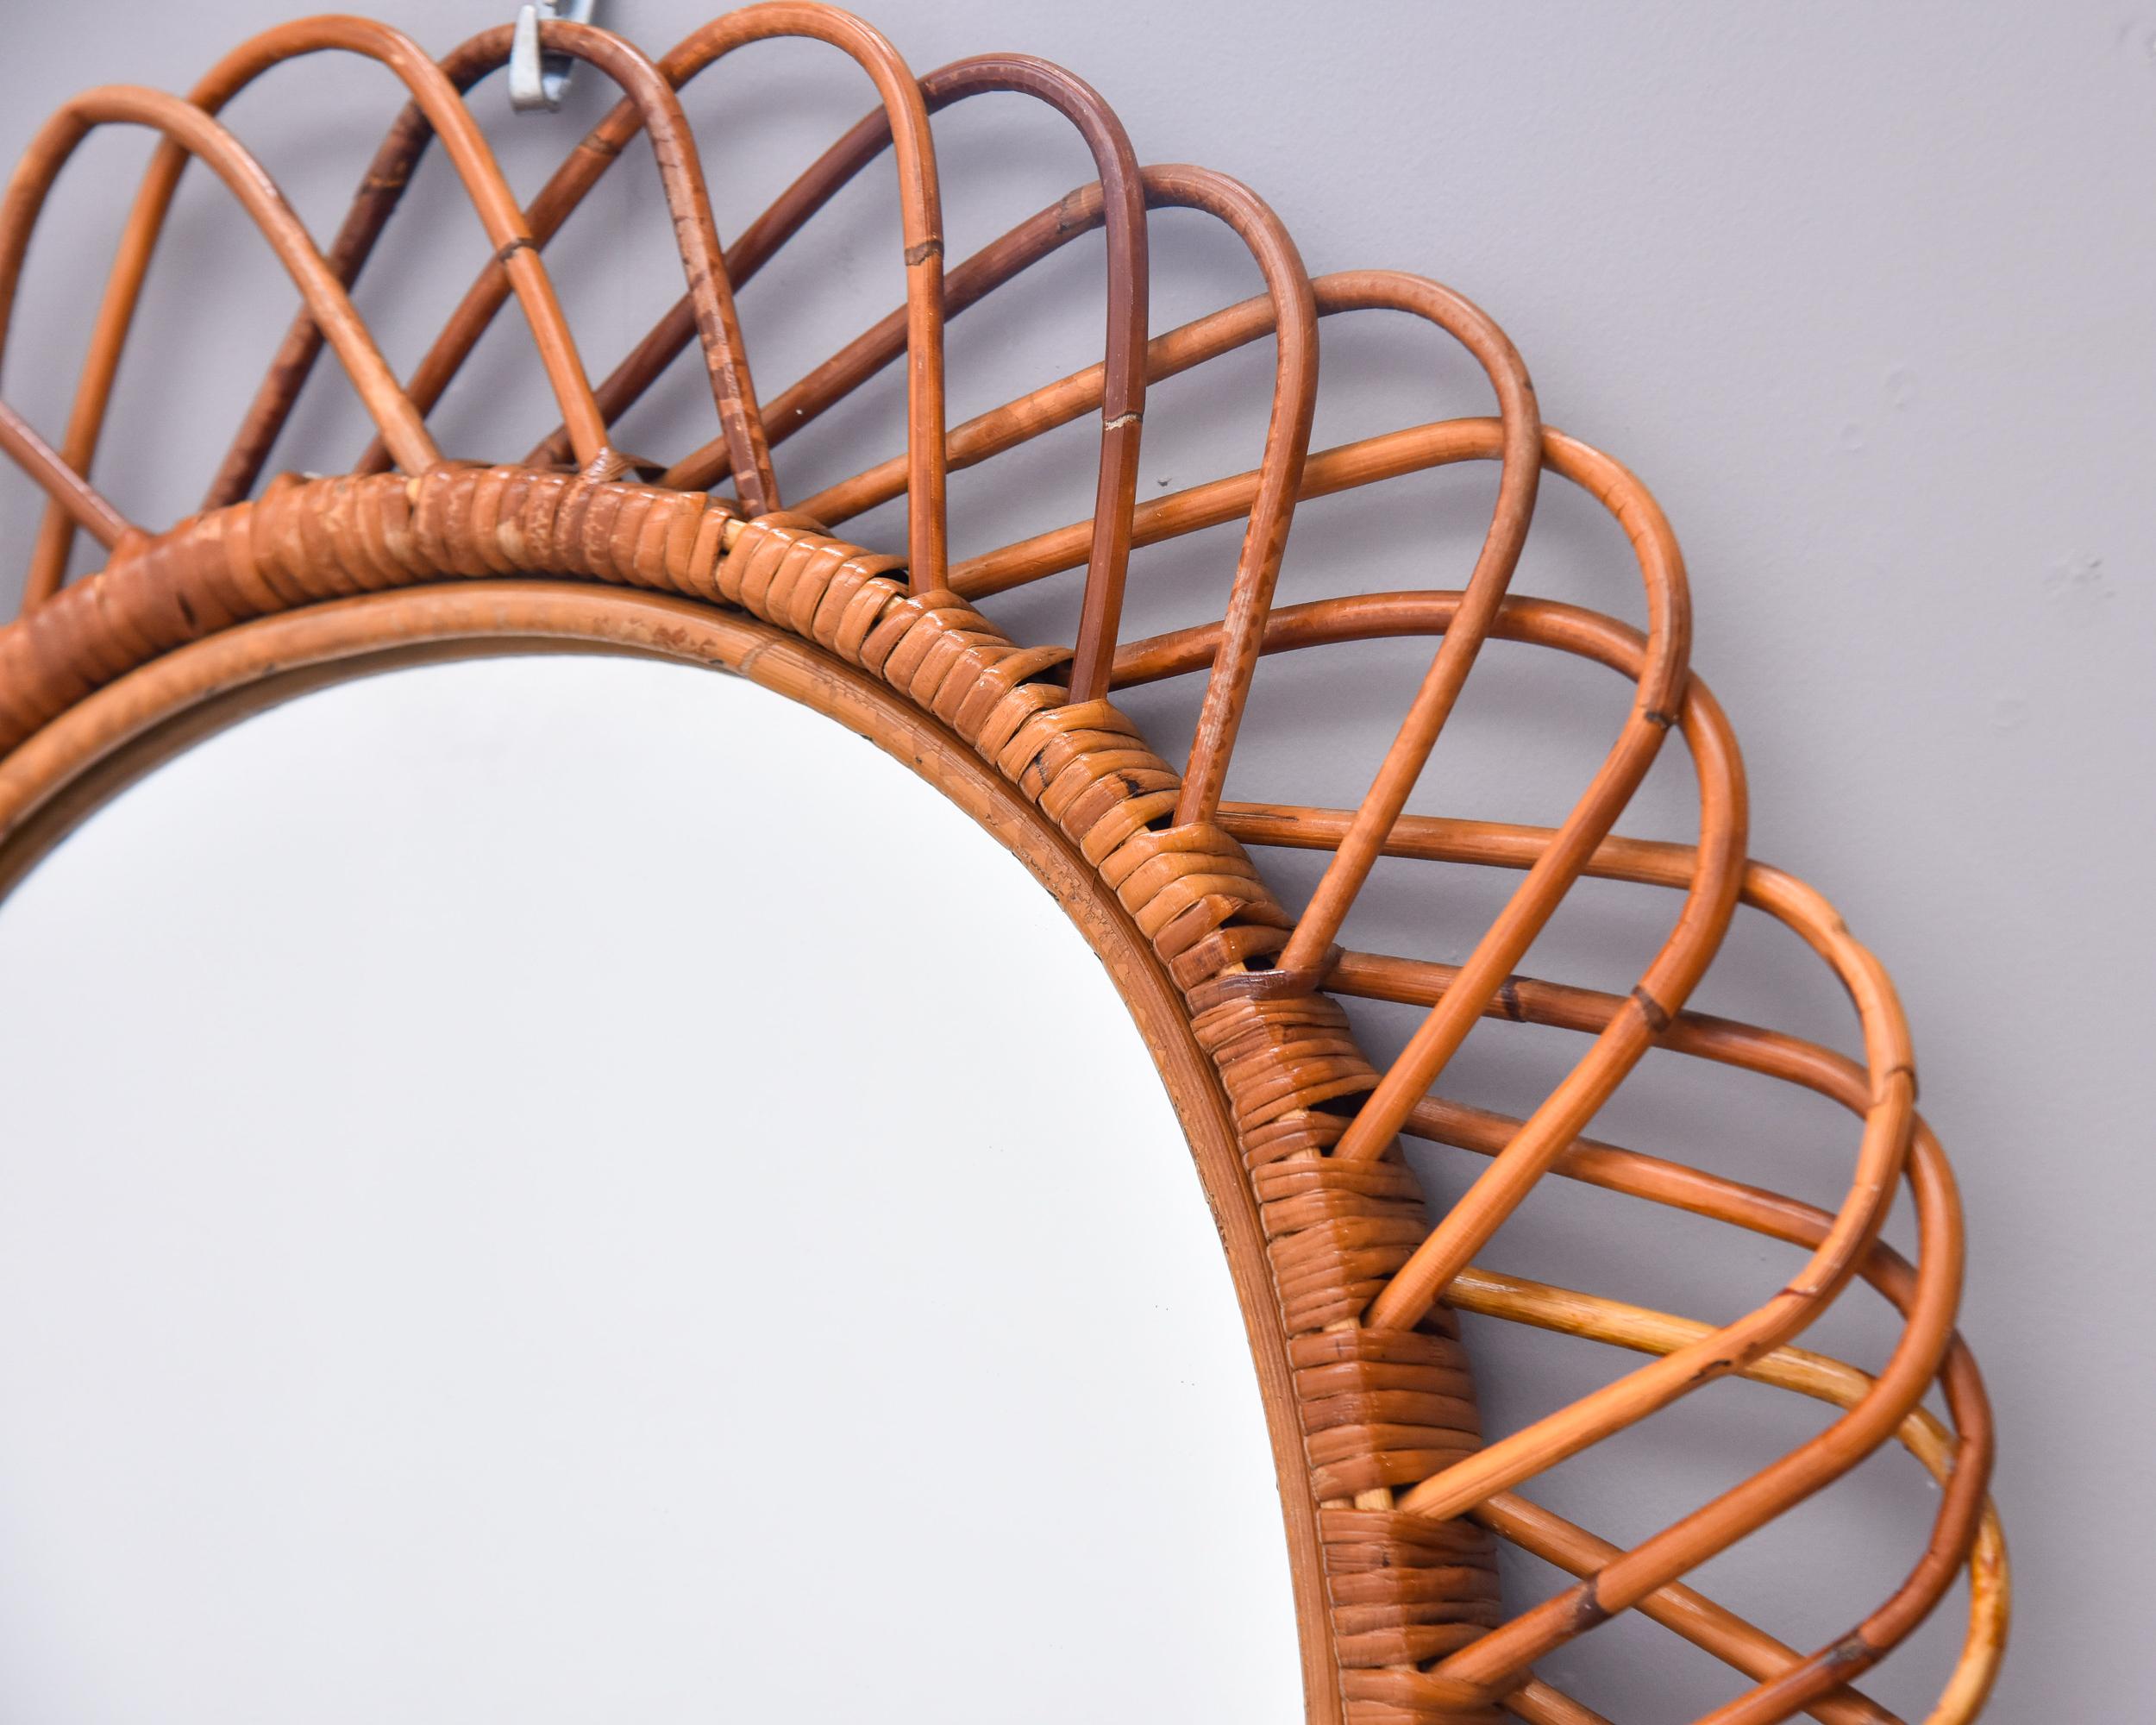 20th Century Midcentury Oval Mirror with Woven Rattan or Wicker Frame